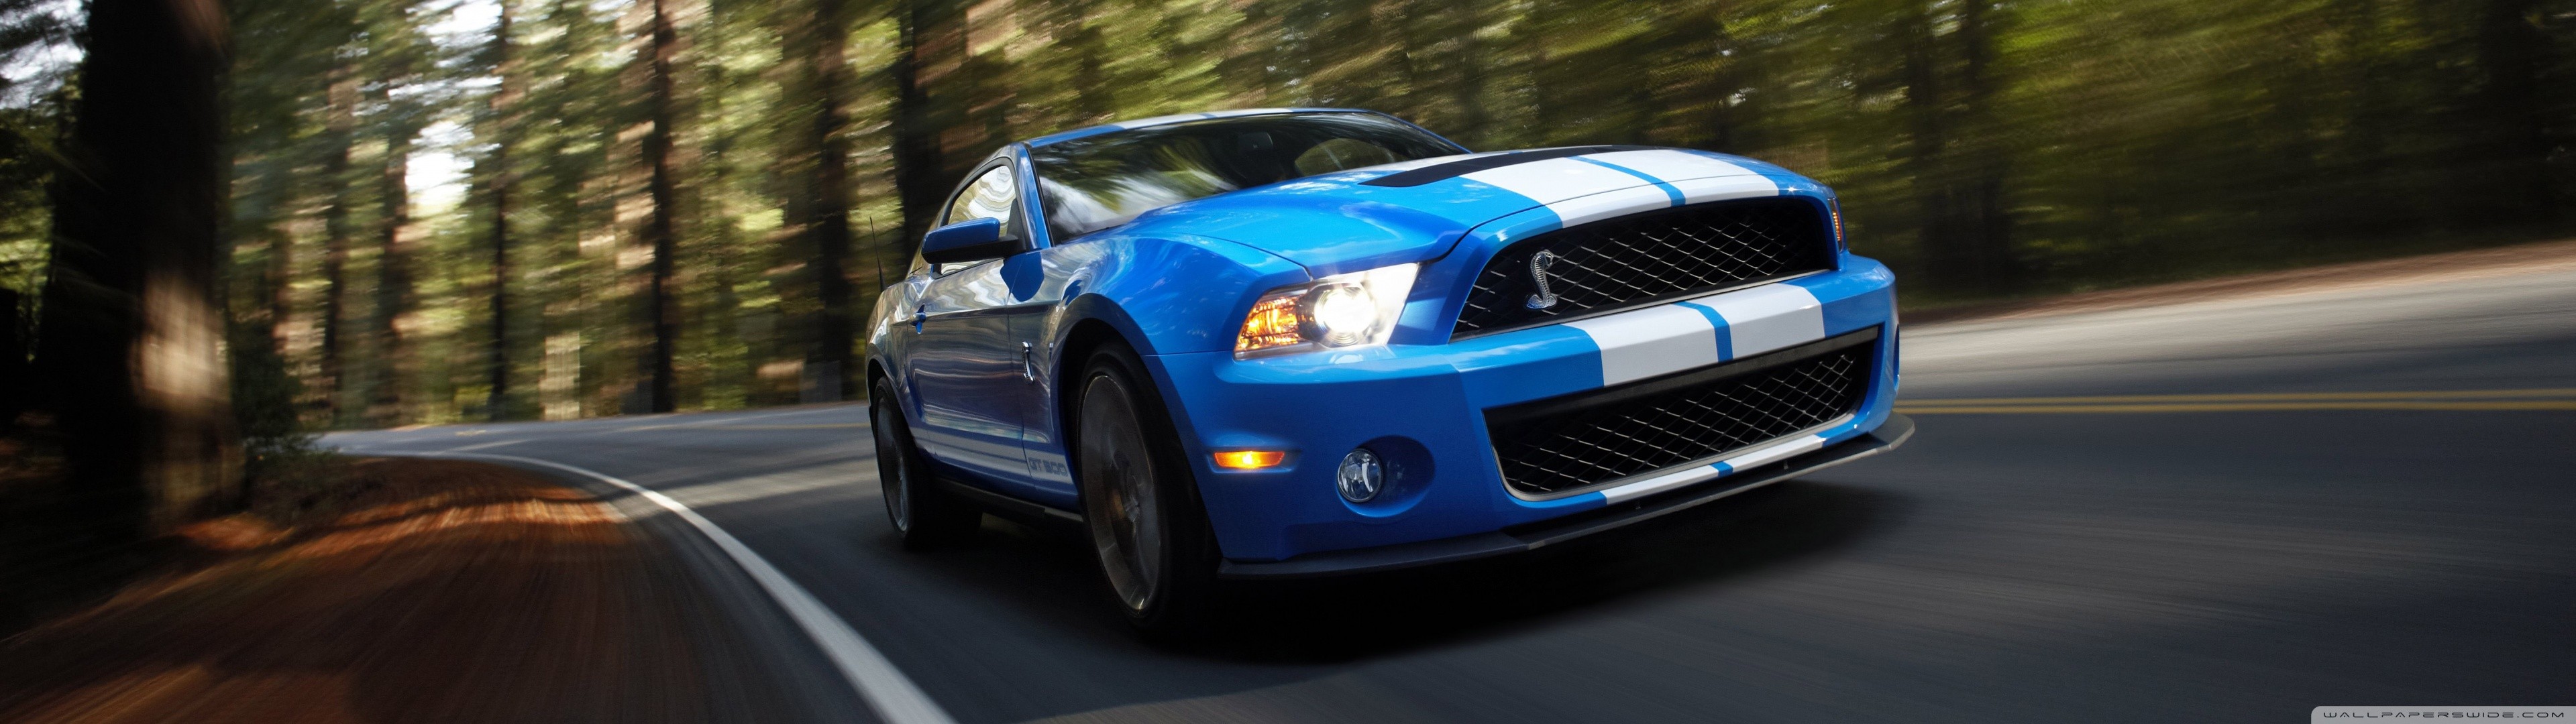 General 3840x1080 car blue cars Ford road vehicle Ford Mustang muscle cars American cars